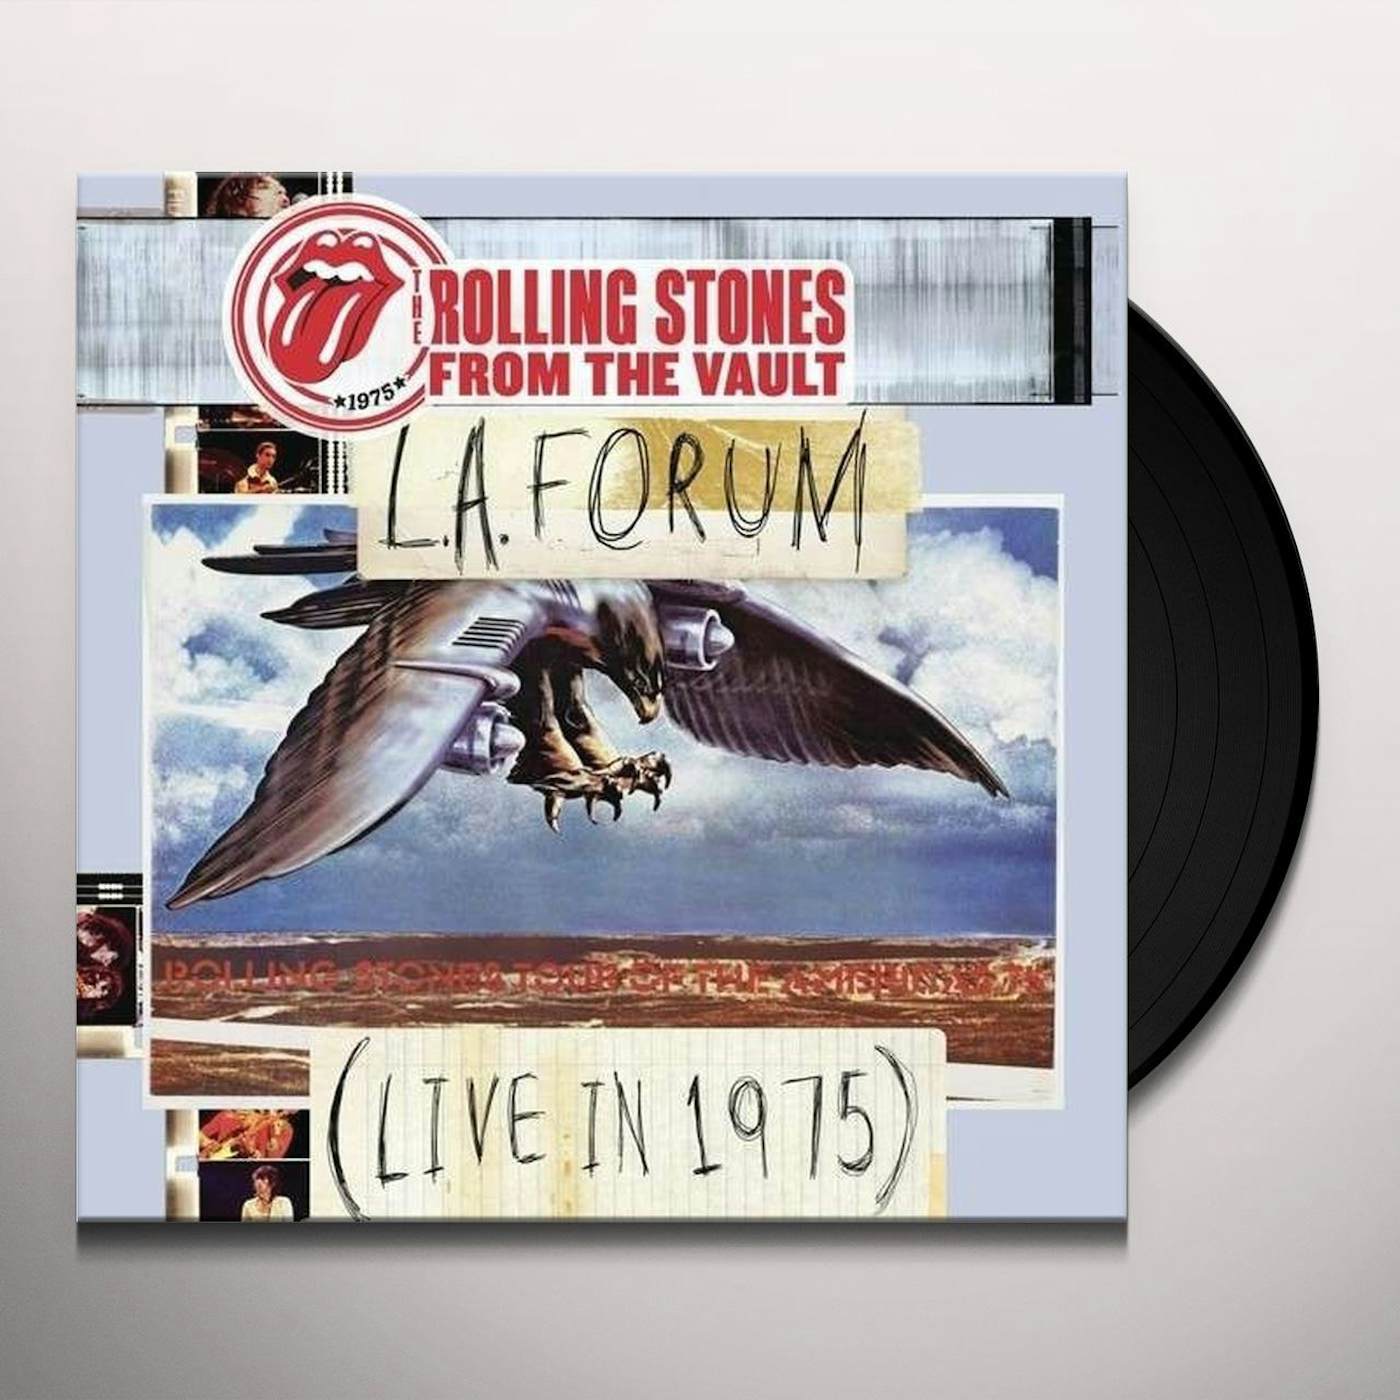 The Rolling Stones FROM THE VAULT: L.A. FORUM (LIVE IN 1975) Vinyl Record